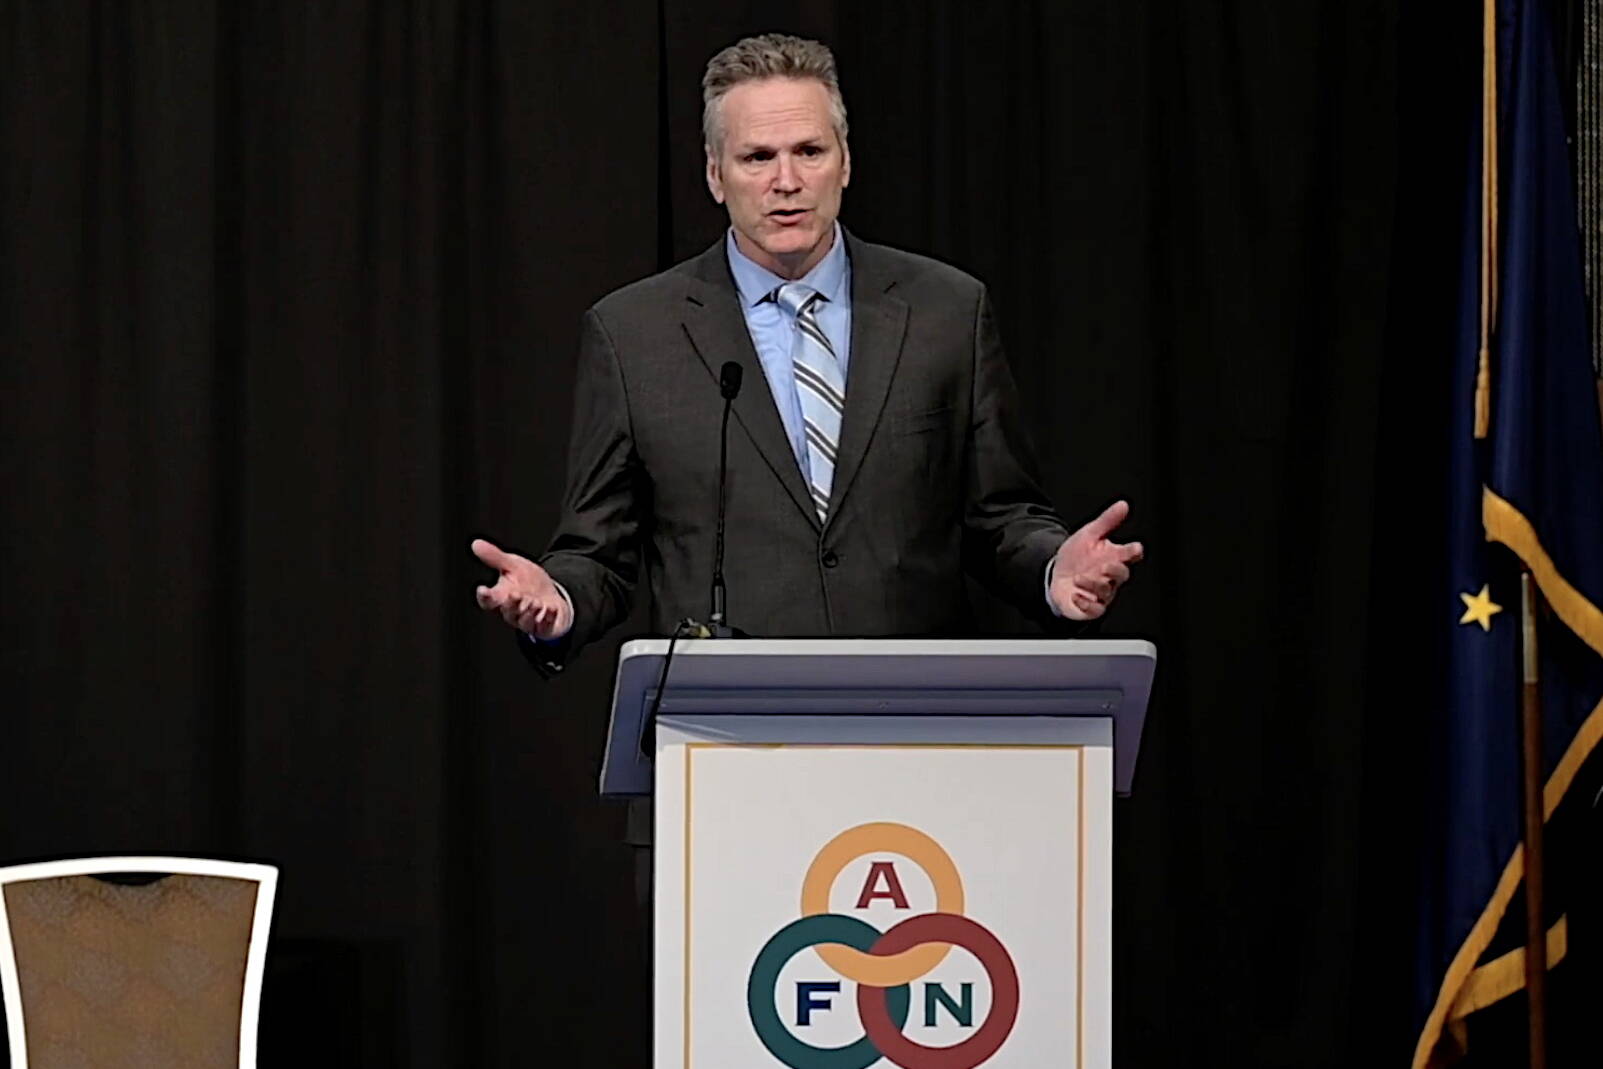 Gov. Mike Dunleavy addresses the Alaska Federation of Natives convention in Anchorage on Thursday morning. All of the elected officials and candidates in the state’s three major races in the November election are scheduled to participate in speeches and debates scheduled during the three-day gathering. (Screenshot from video provided by the office of Gov. Mike Dunleavy)